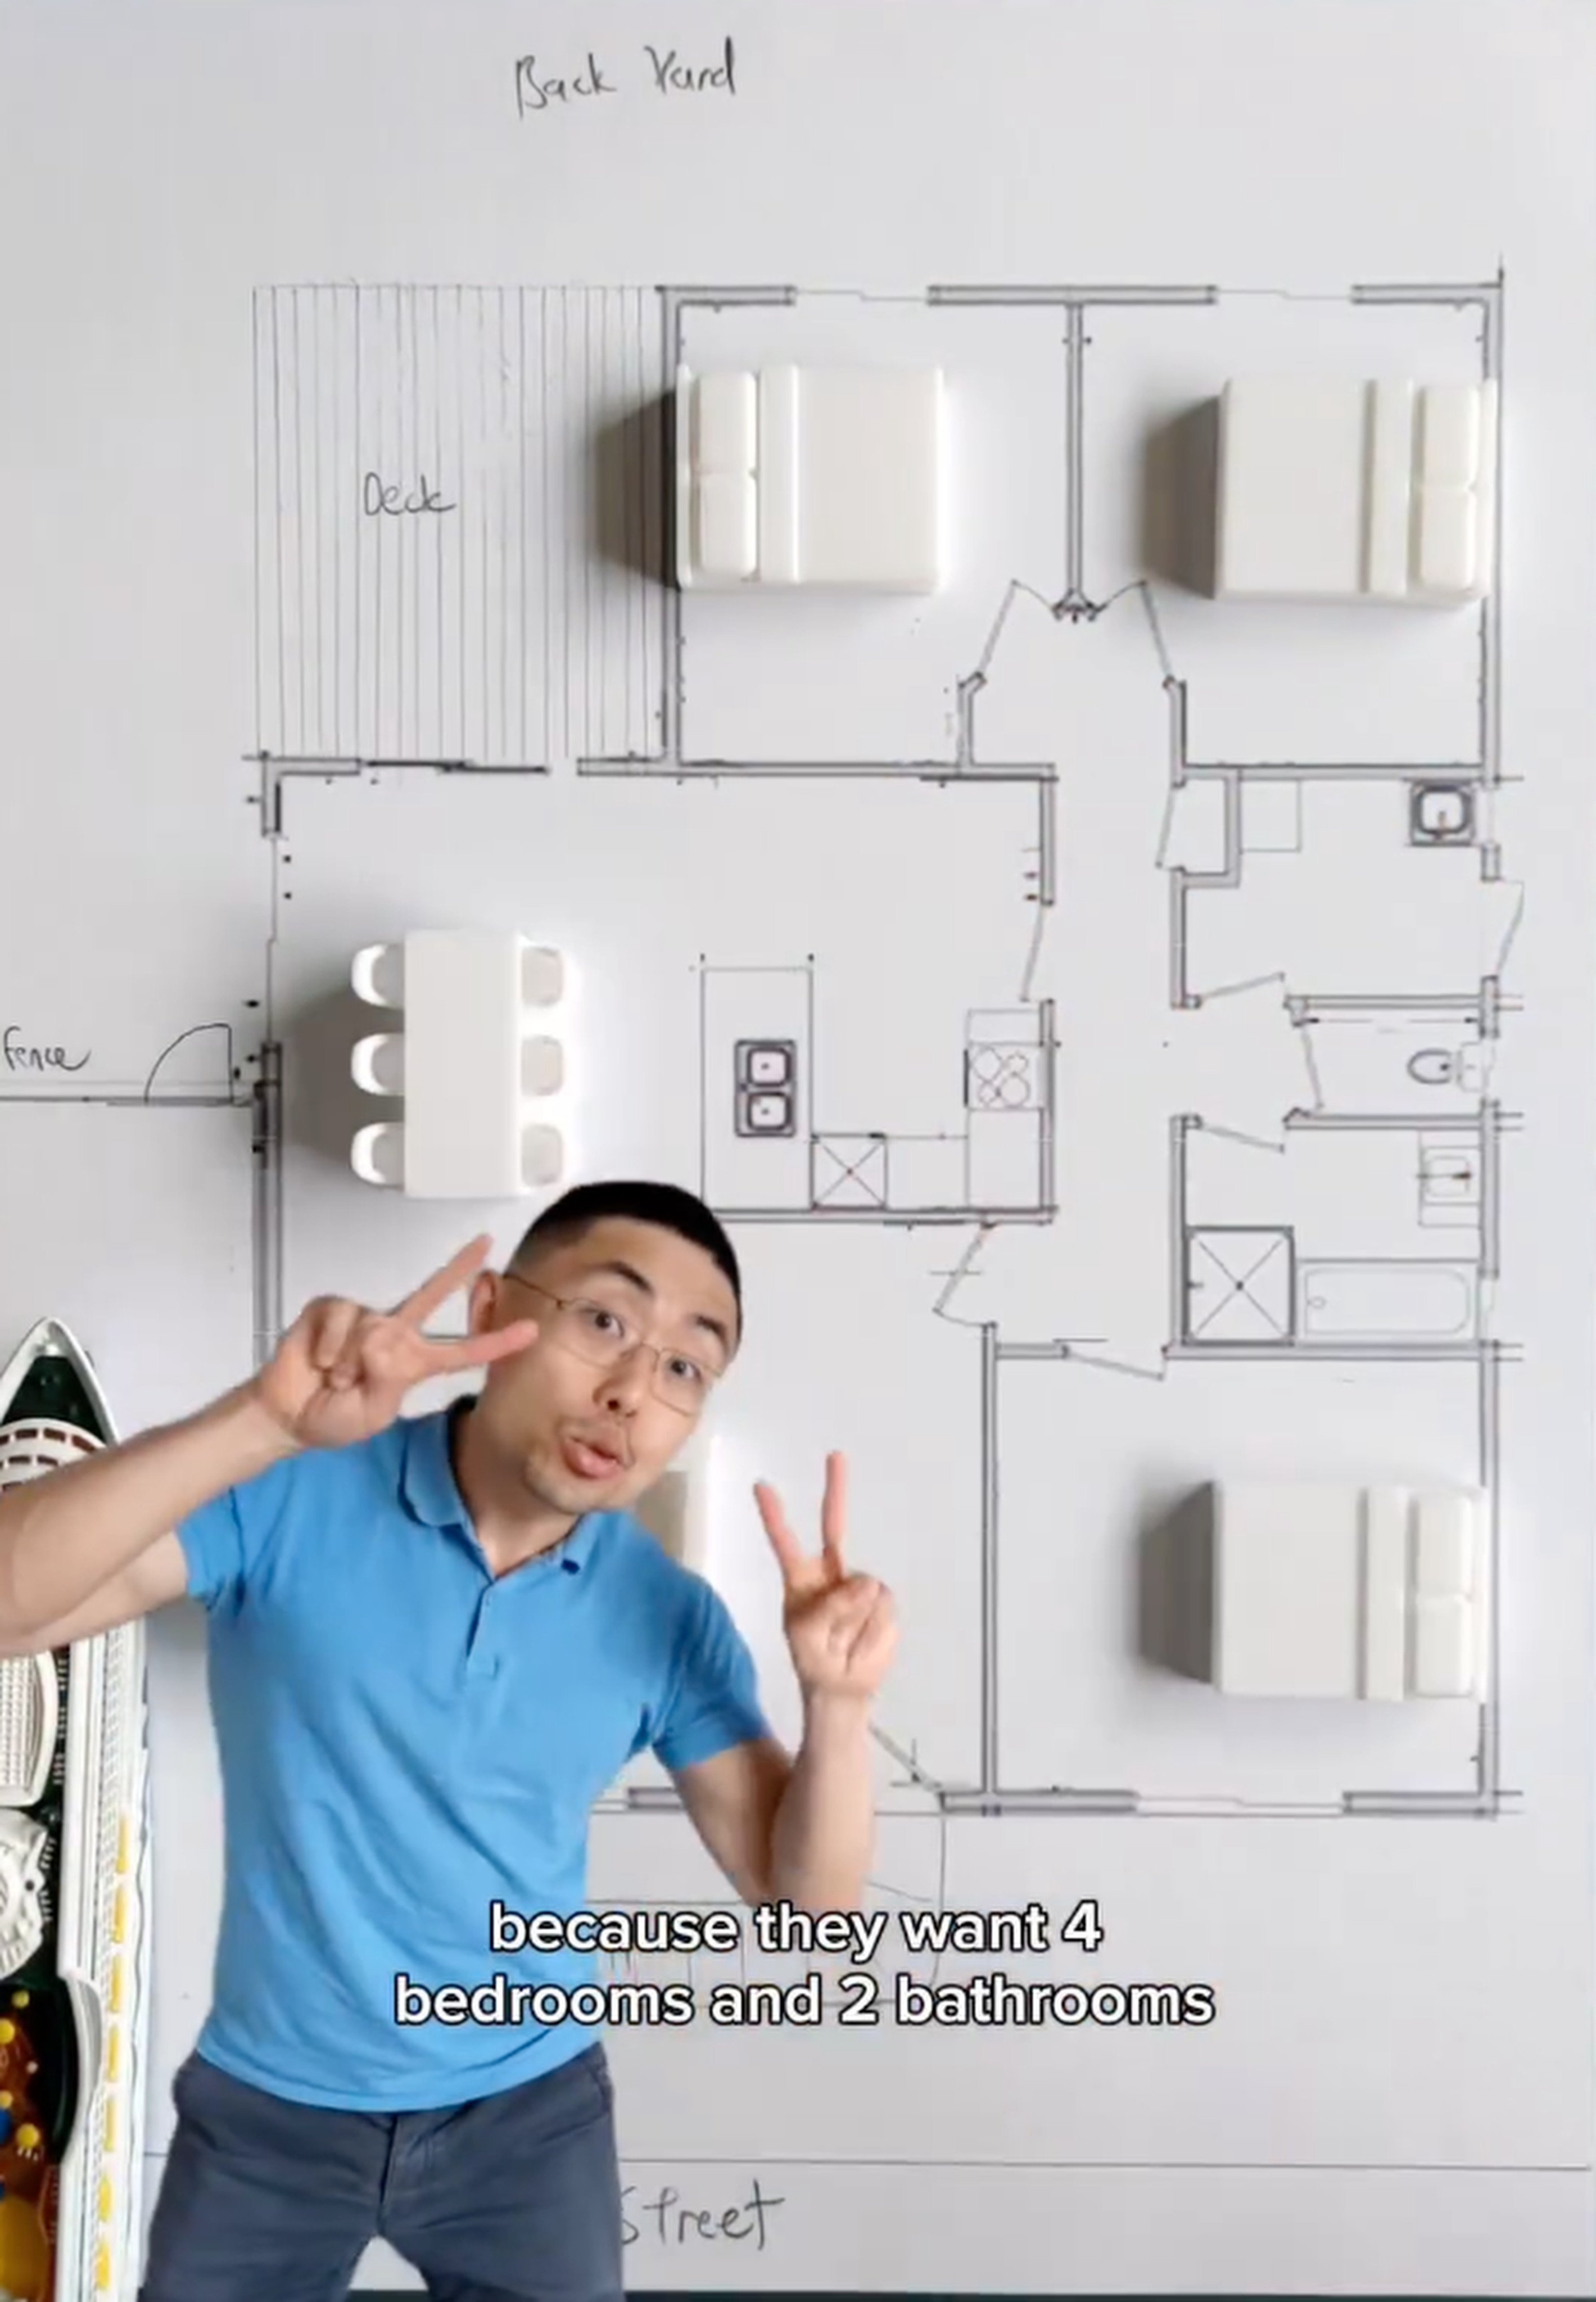 Singaporean architect Cliff Tan in a still from one of his Instagram videos. Photo: Instagram/dearmodern